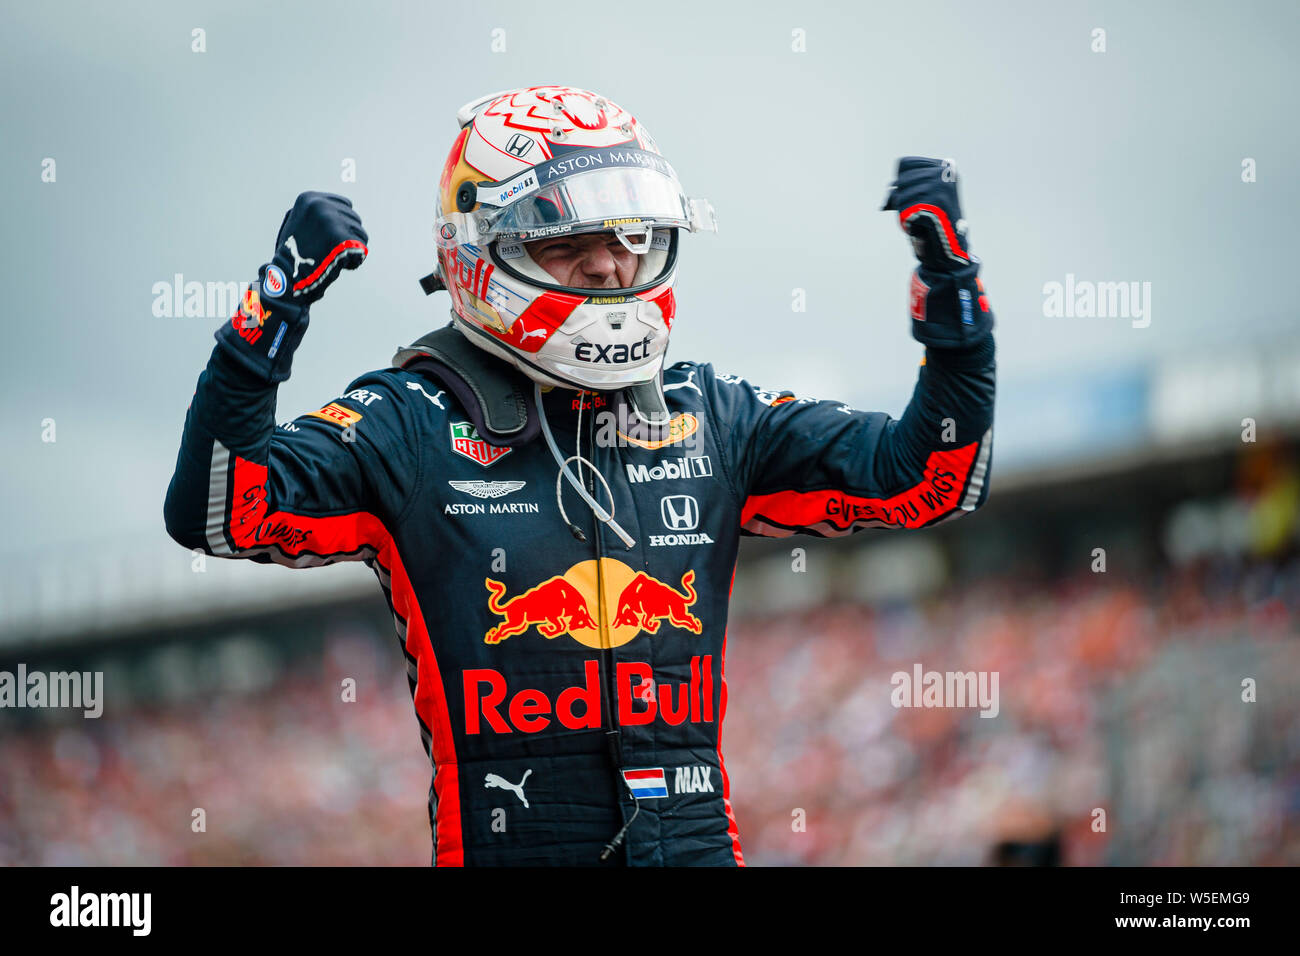 Hockenheim, Germany. 28th July, 2019. Red Bull Racing's Dutch driver Max Verstappen celebrates after winning the German F1 Grand Prix race. Credit: SOPA Images Limited/Alamy Live News Stock Photo